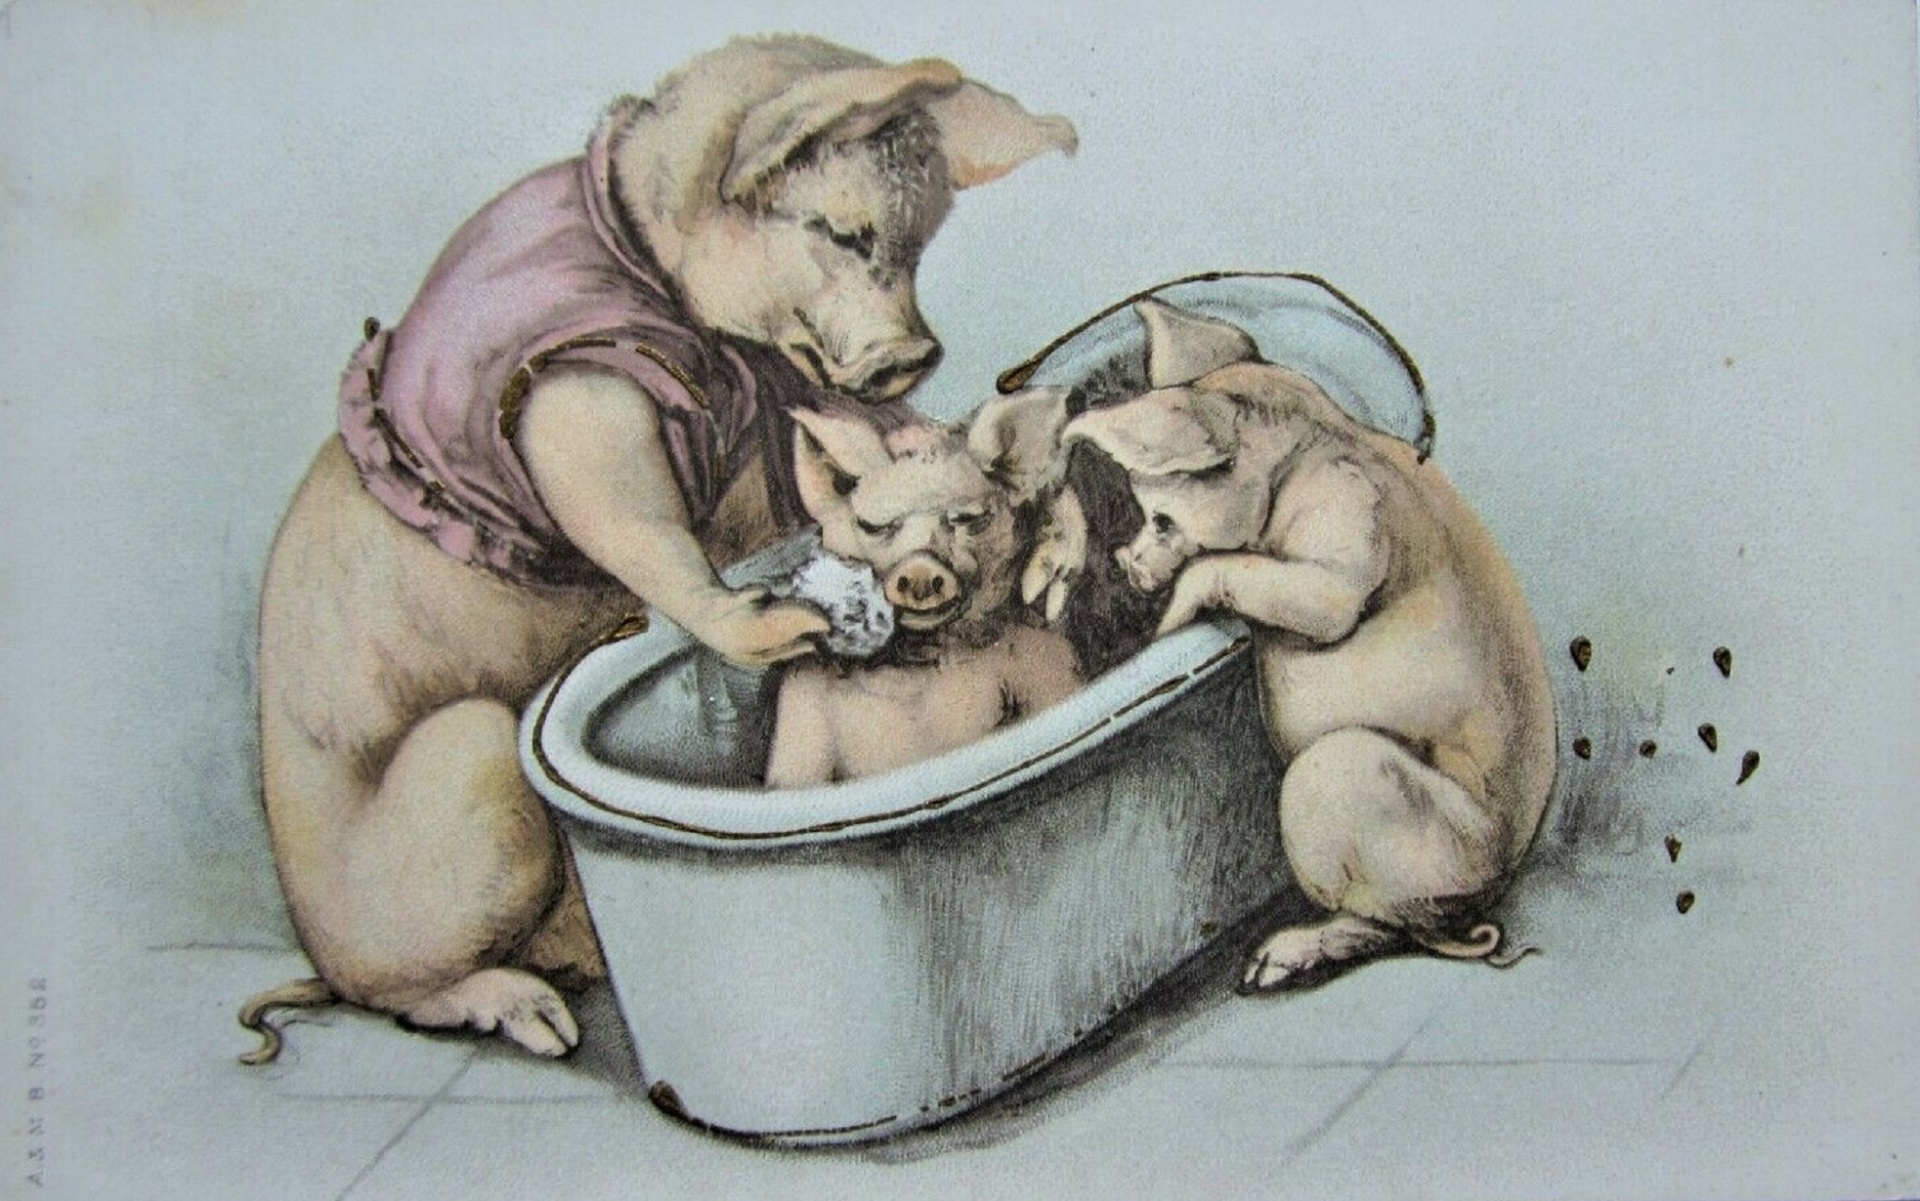 Mama Pig and Piglets Bath Artist Unknown Year ca, 1910 Public Domain